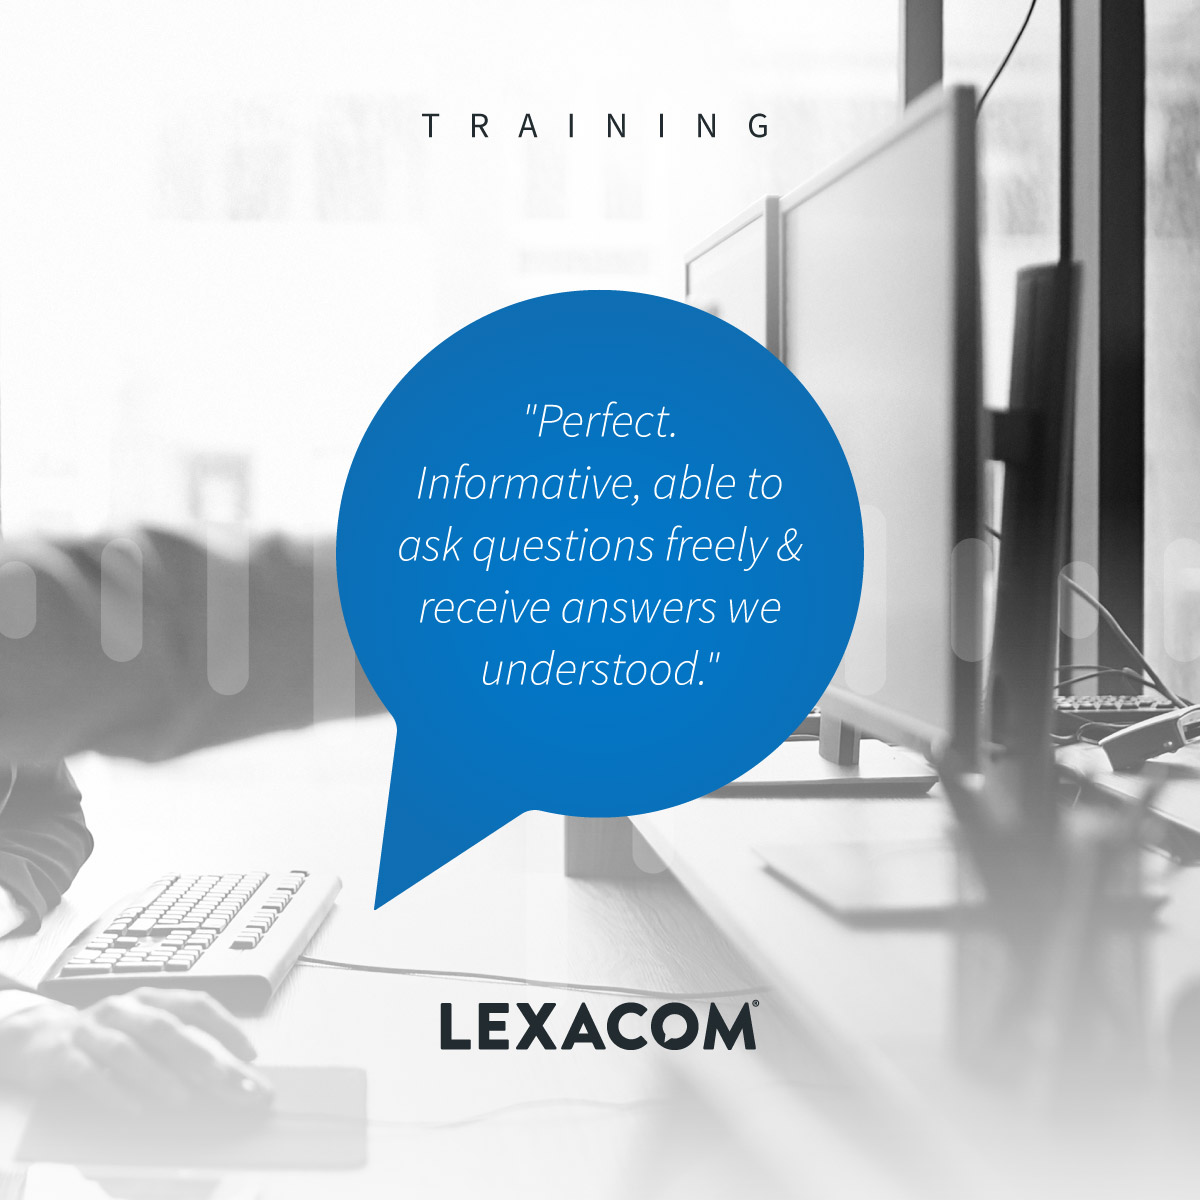 Take a look at our website to see some of the great feedback we've received for our training sessions so far in 2024:

lexacom.co.uk/lexacom-case-s…

#nhs #nhsdigital #healthcare #workflows #speechrecognition